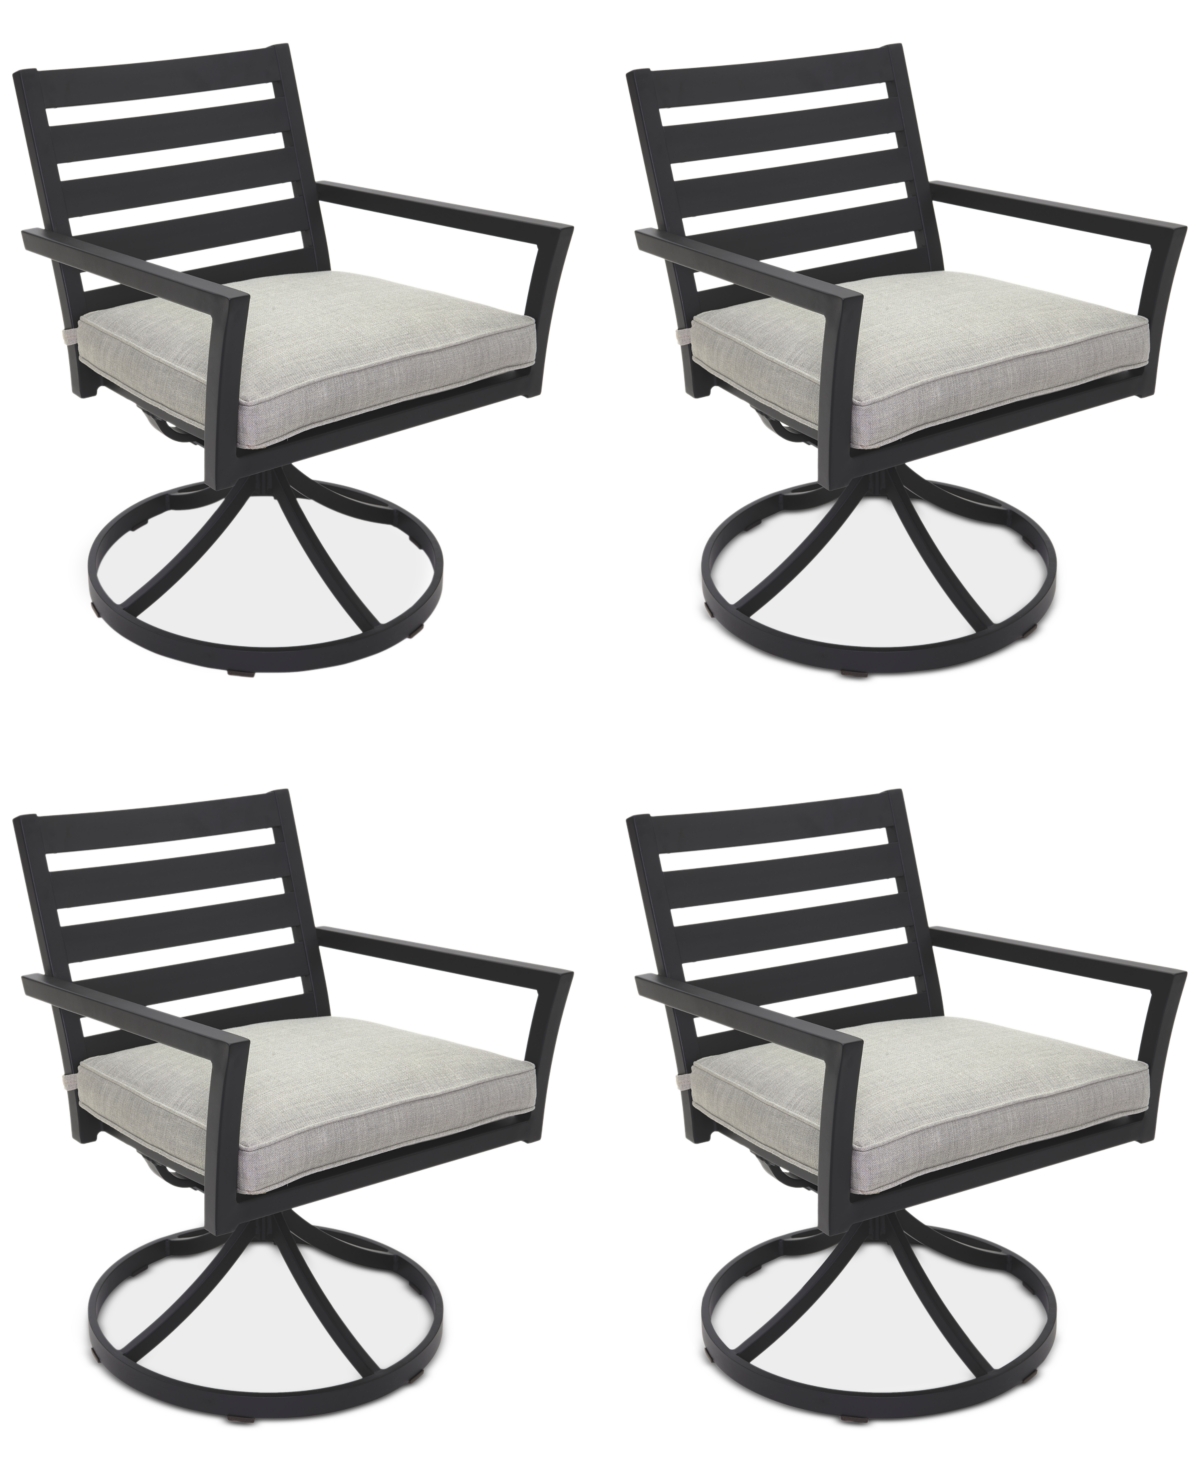 Agio Astaire Outdoor 4-pc Swivel Chair Bundle Set In Oyster Light Grey